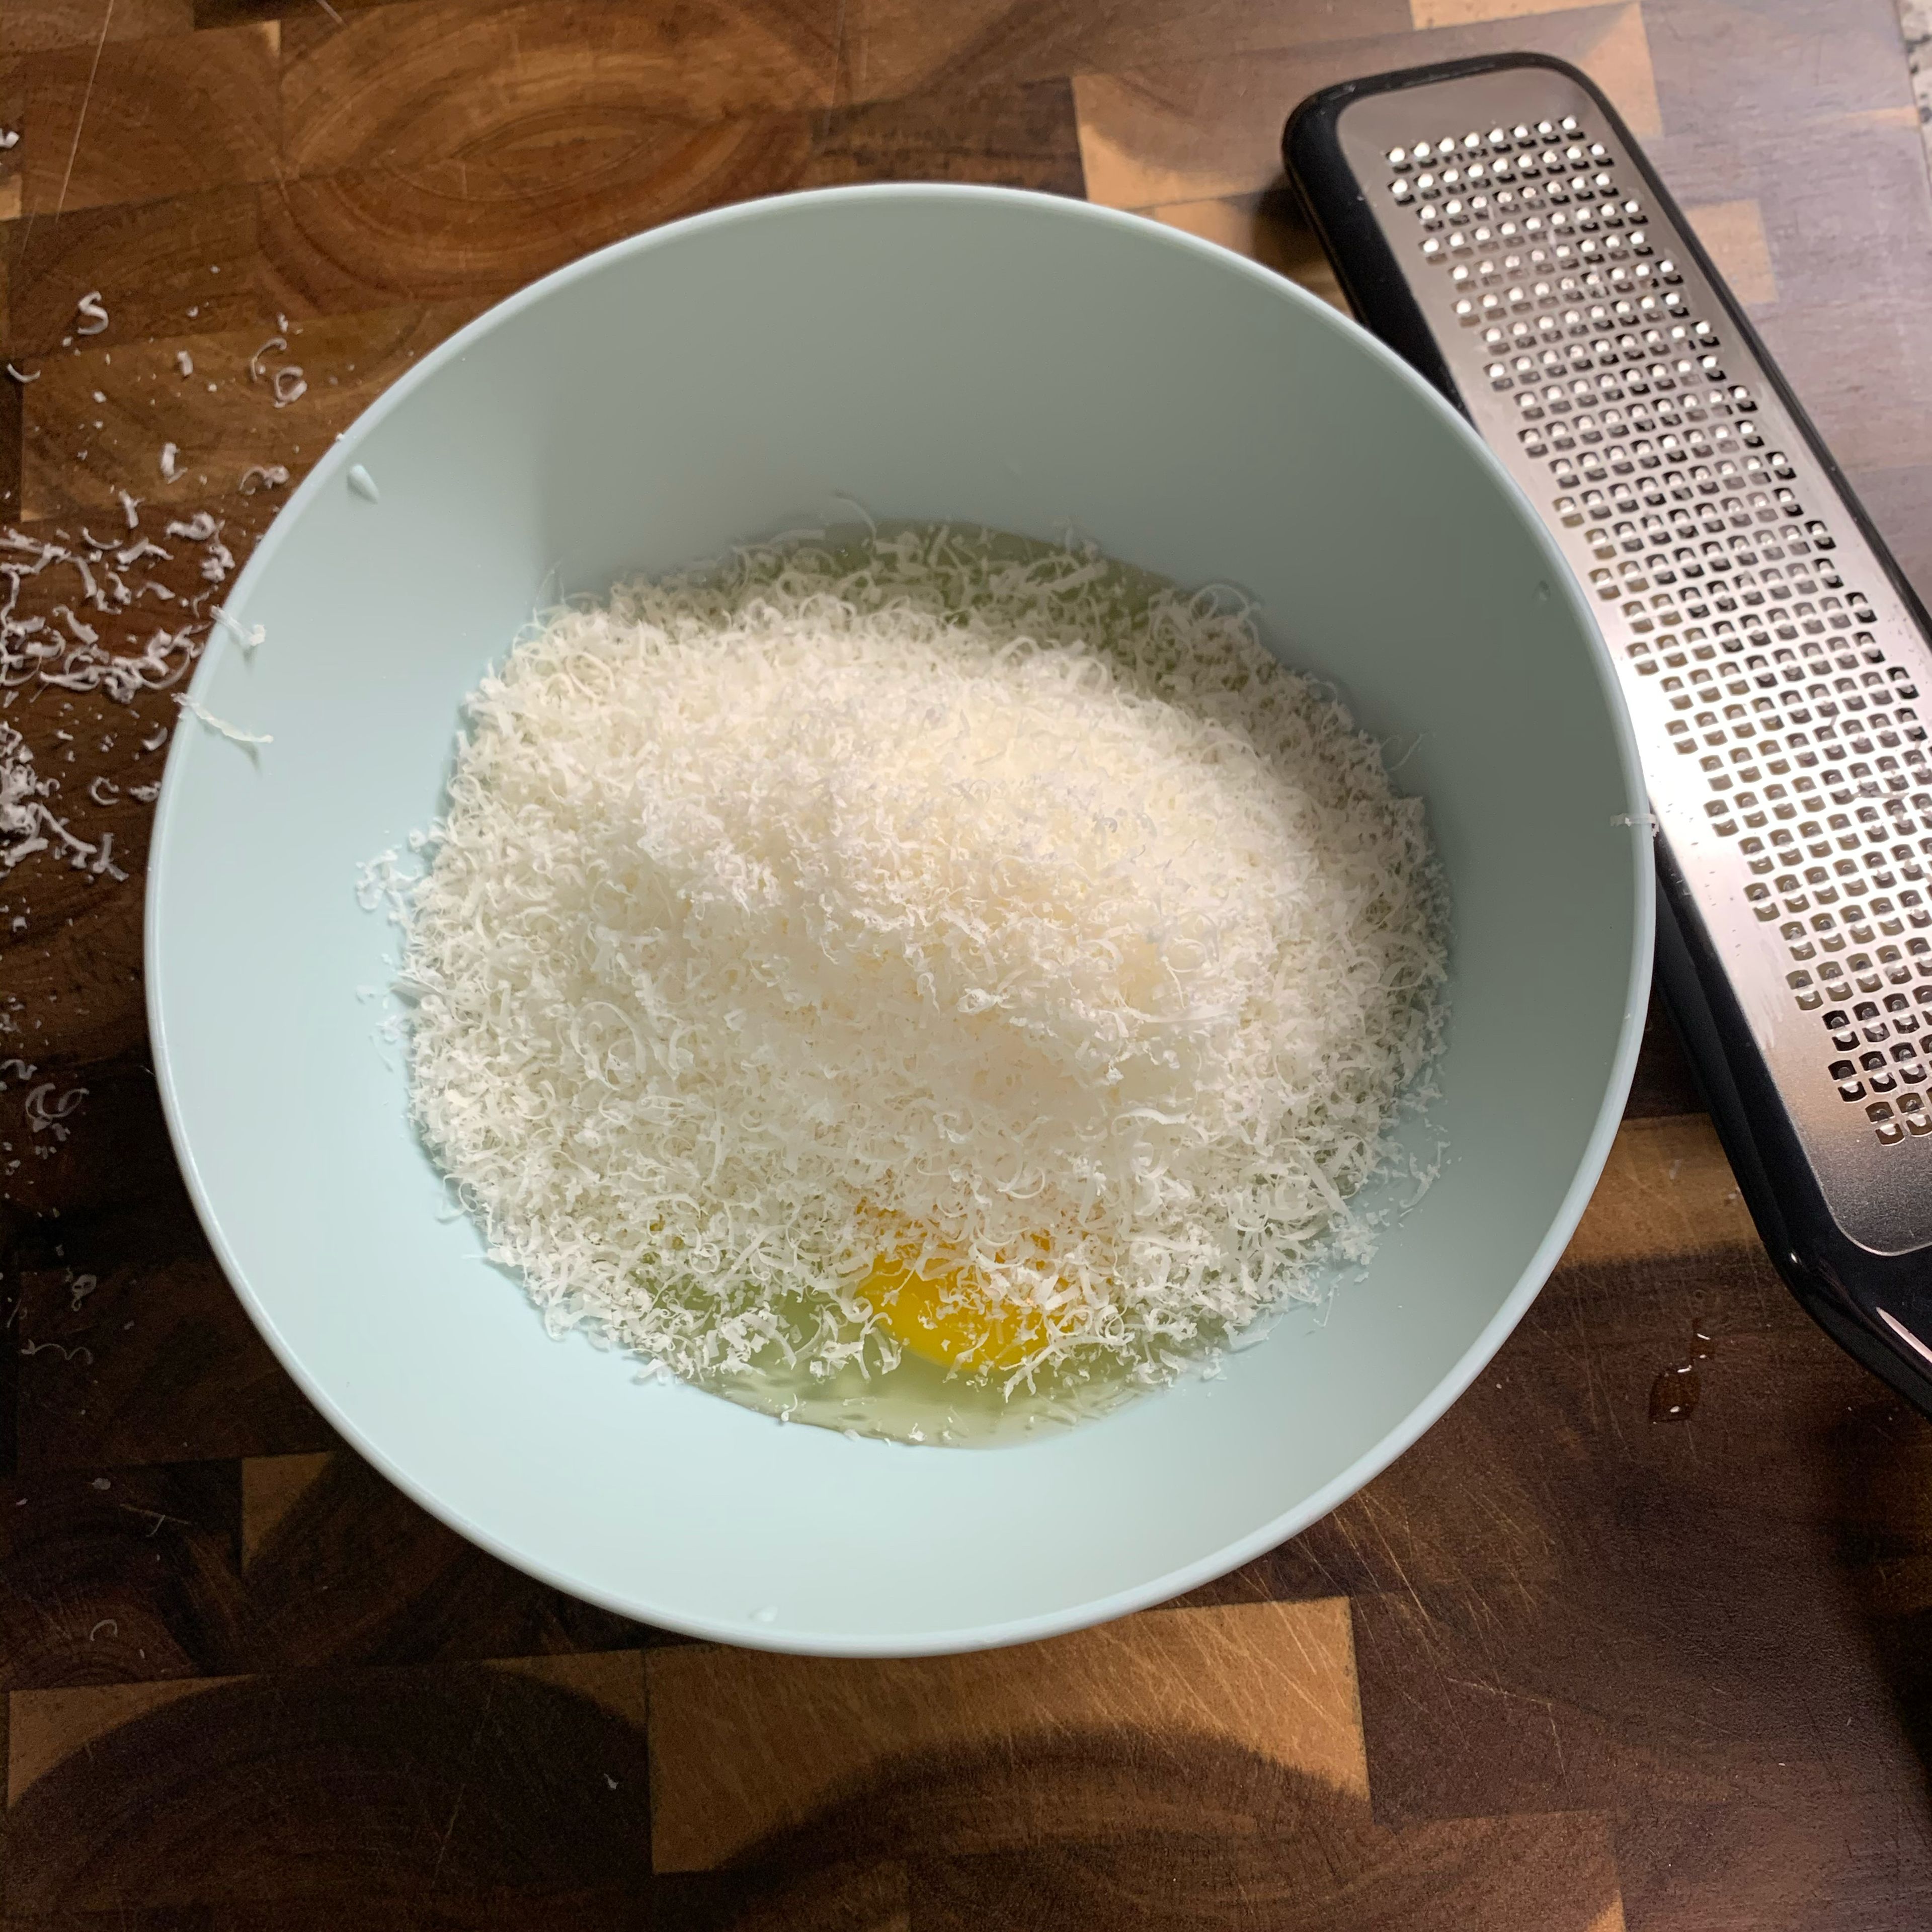 Add 3 eggs and grated Parmesan cheese into a bow. It’s not scientific how much to put in, more cheese can be added later. Use a microplane or the smallest size of a grater.